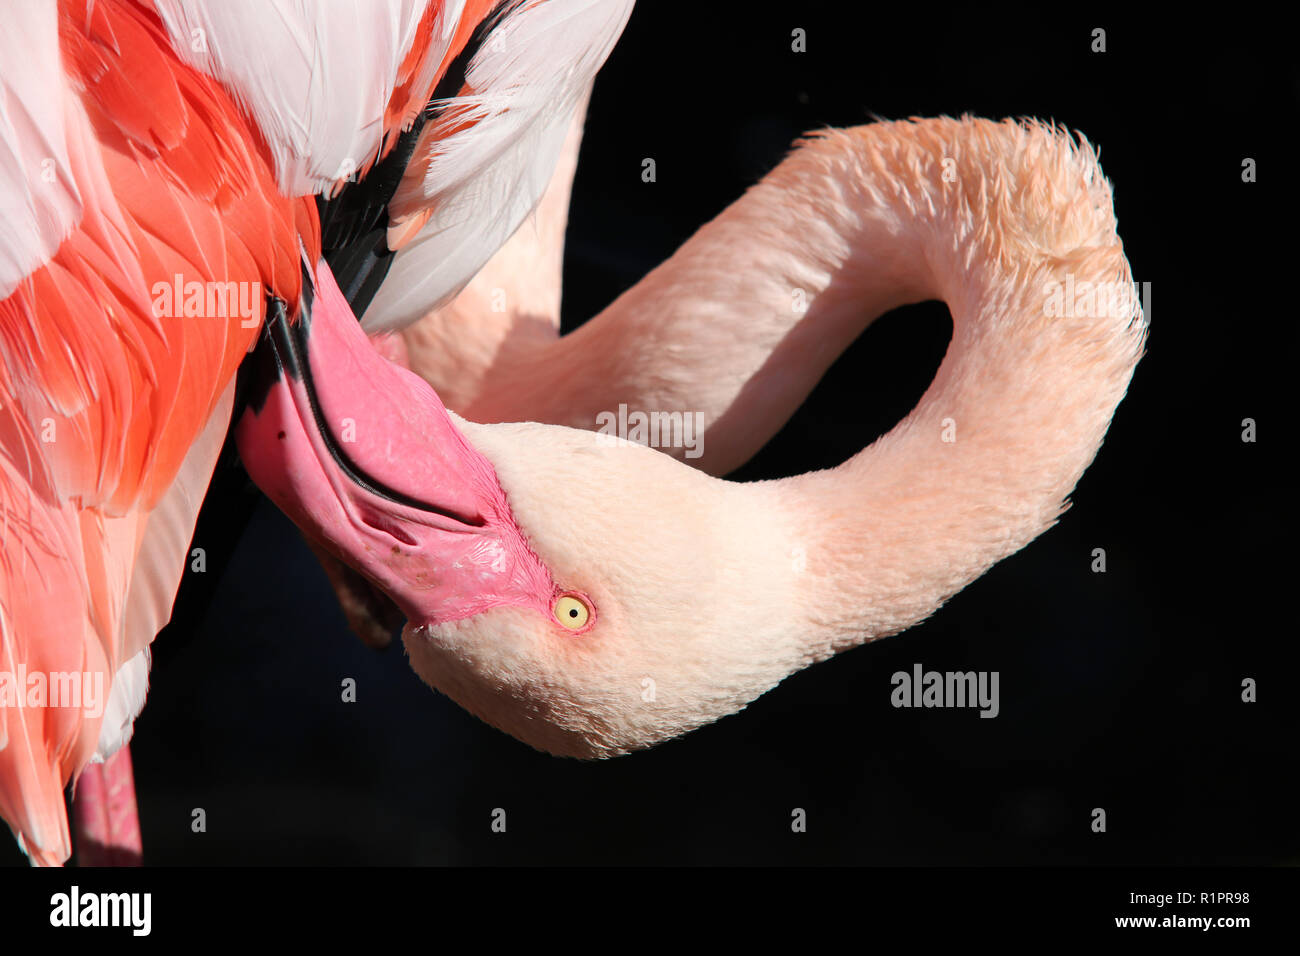 Grater flamingo - close-up of the head of grater flamingo Stock Photo